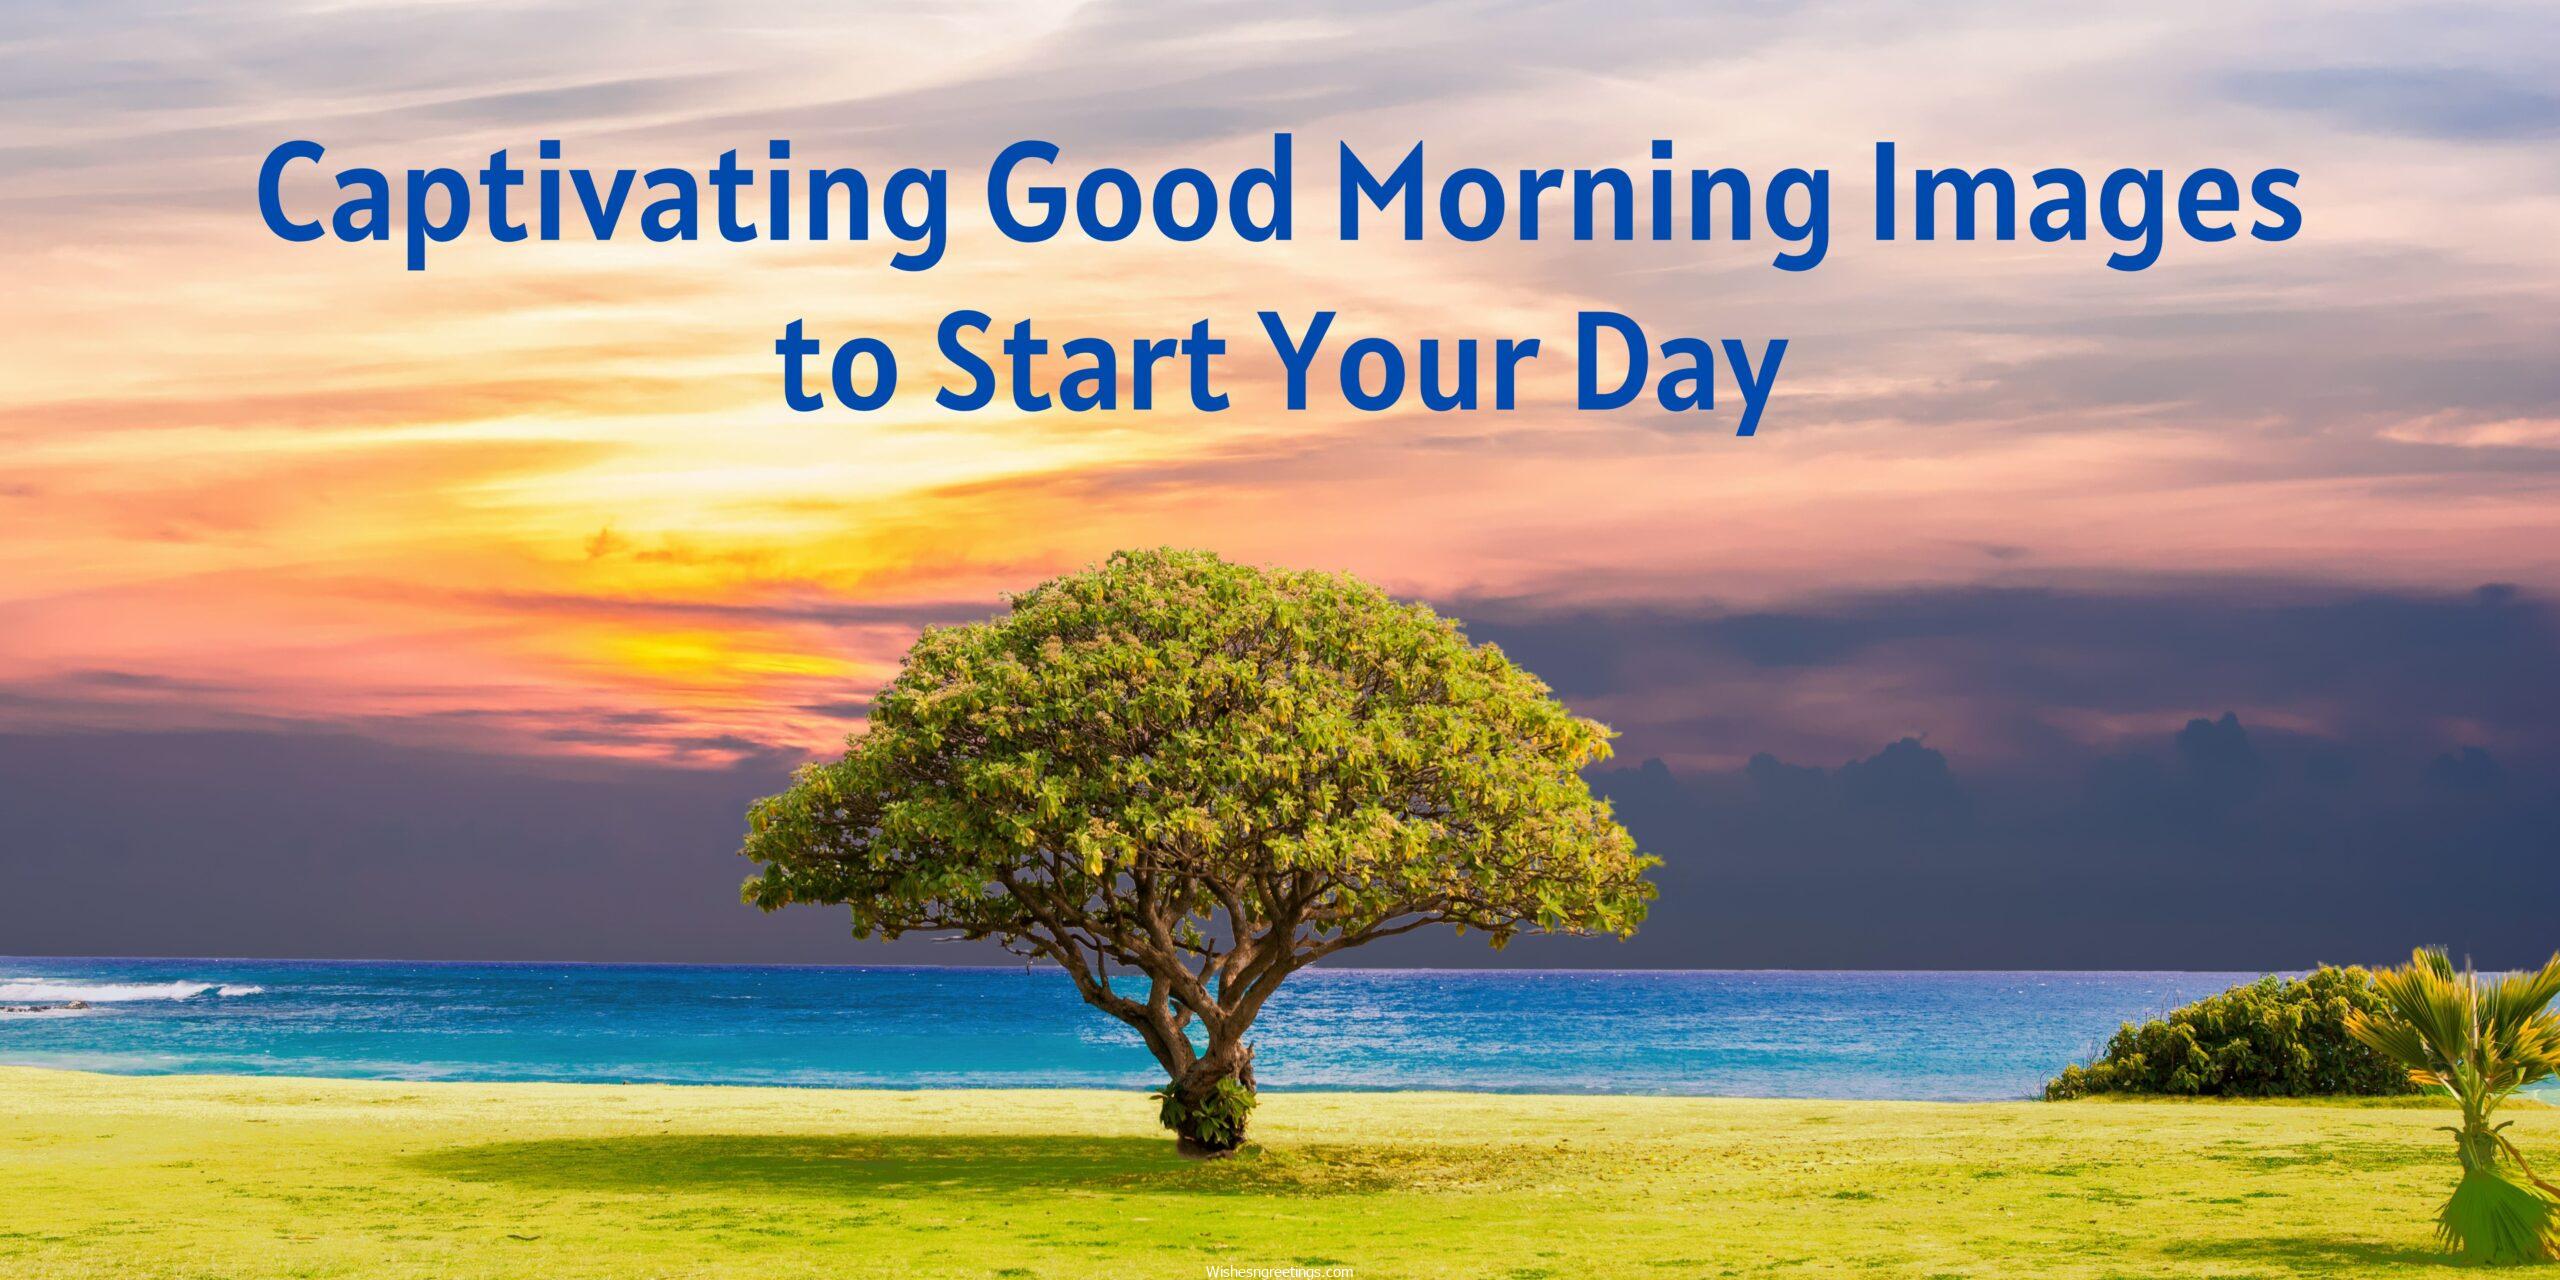 Captivating Good Morning Images to Start Your Day